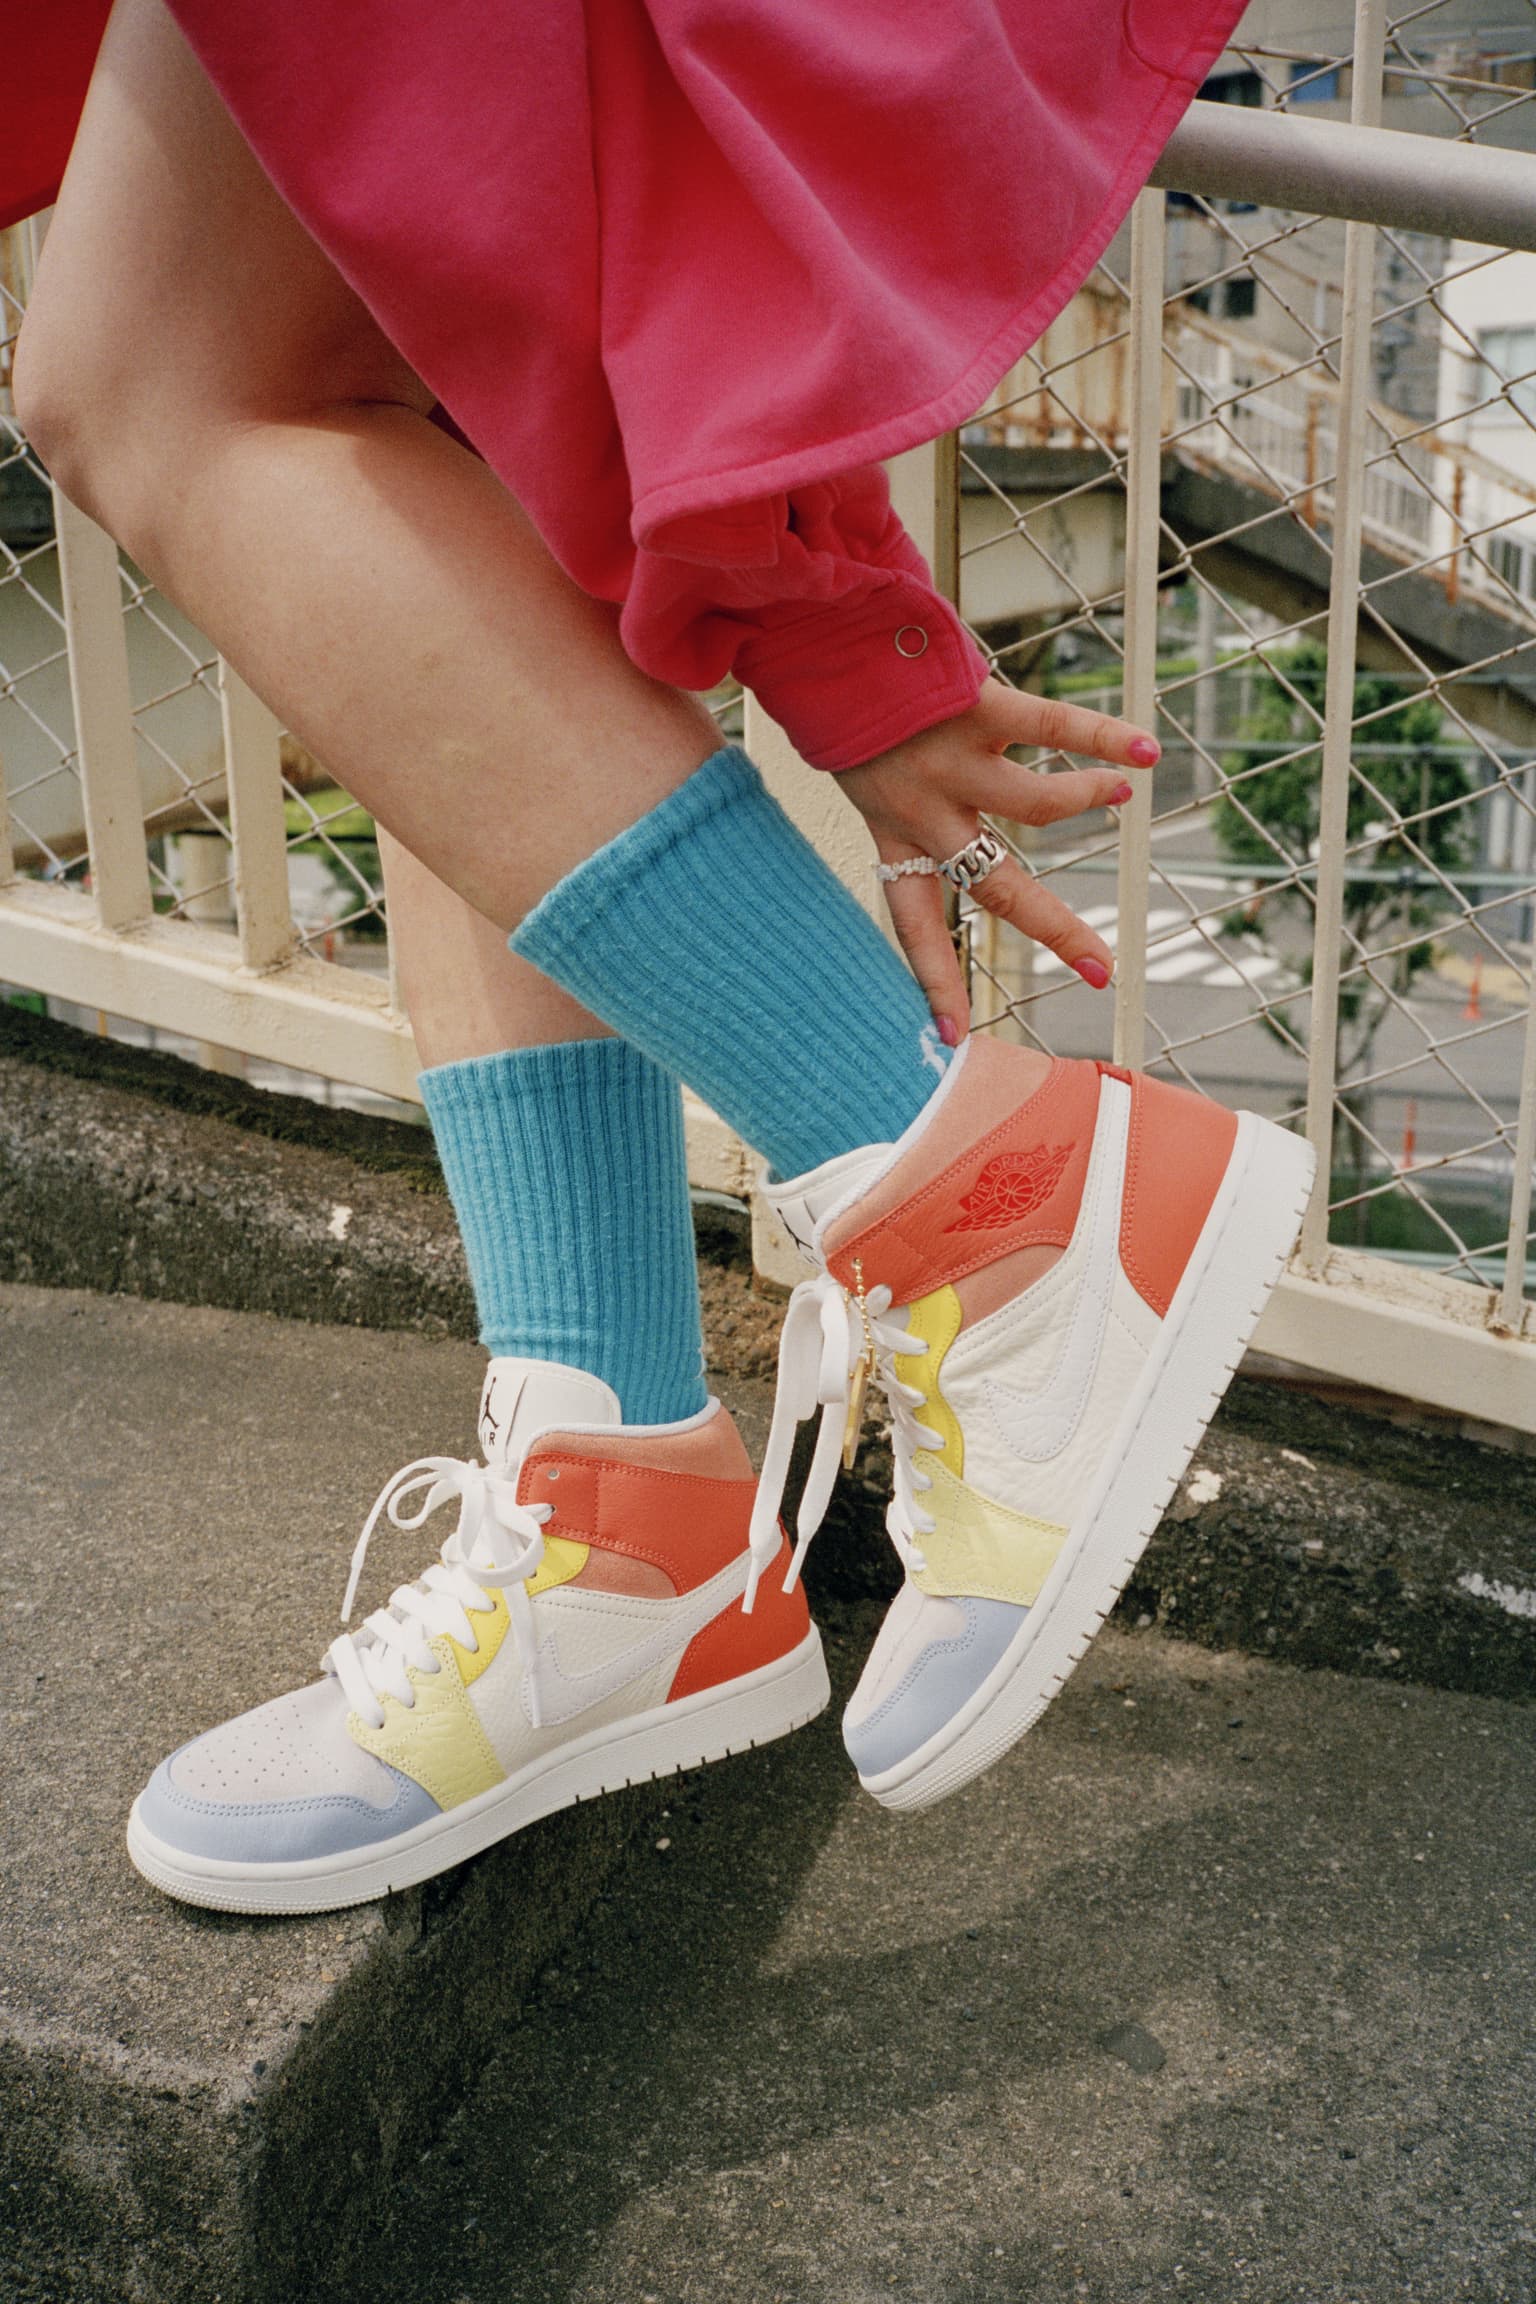 Nike公式 レディース エア ジョーダン 1 Mid To My First Coach Dj6908 100 Wmns Aj 1 Mid Nike Snkrs Jp